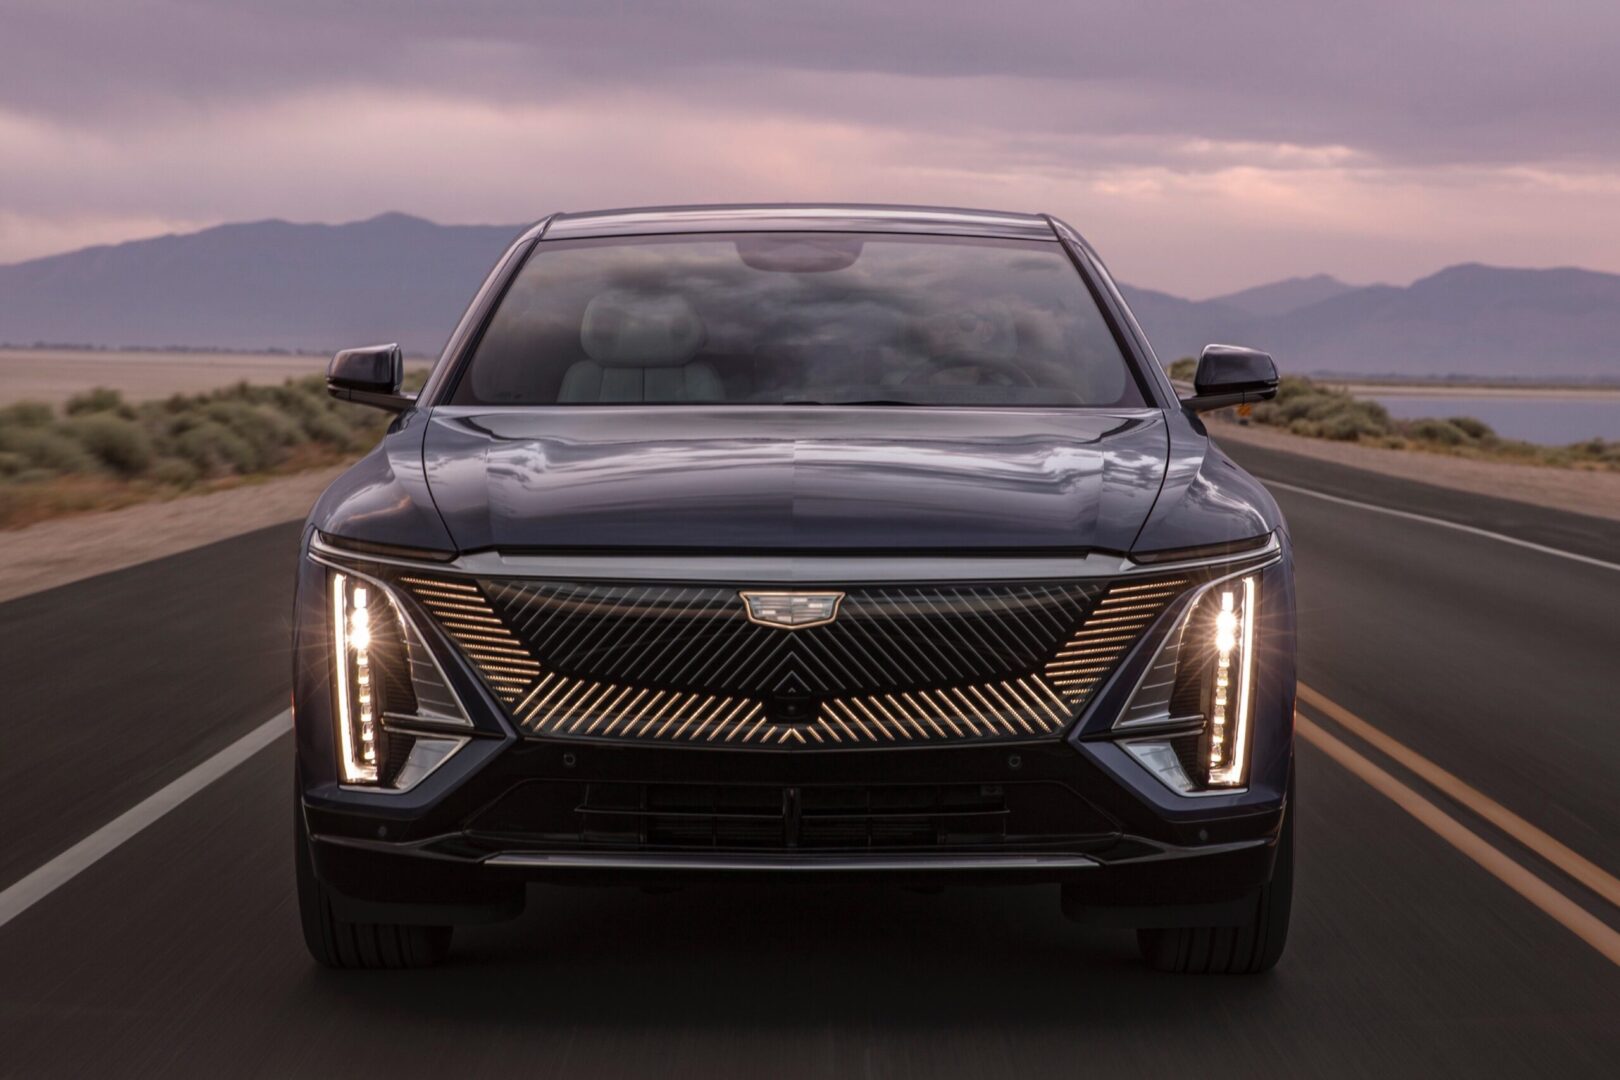 The 2020 cadillac xt5 is driving down the road.